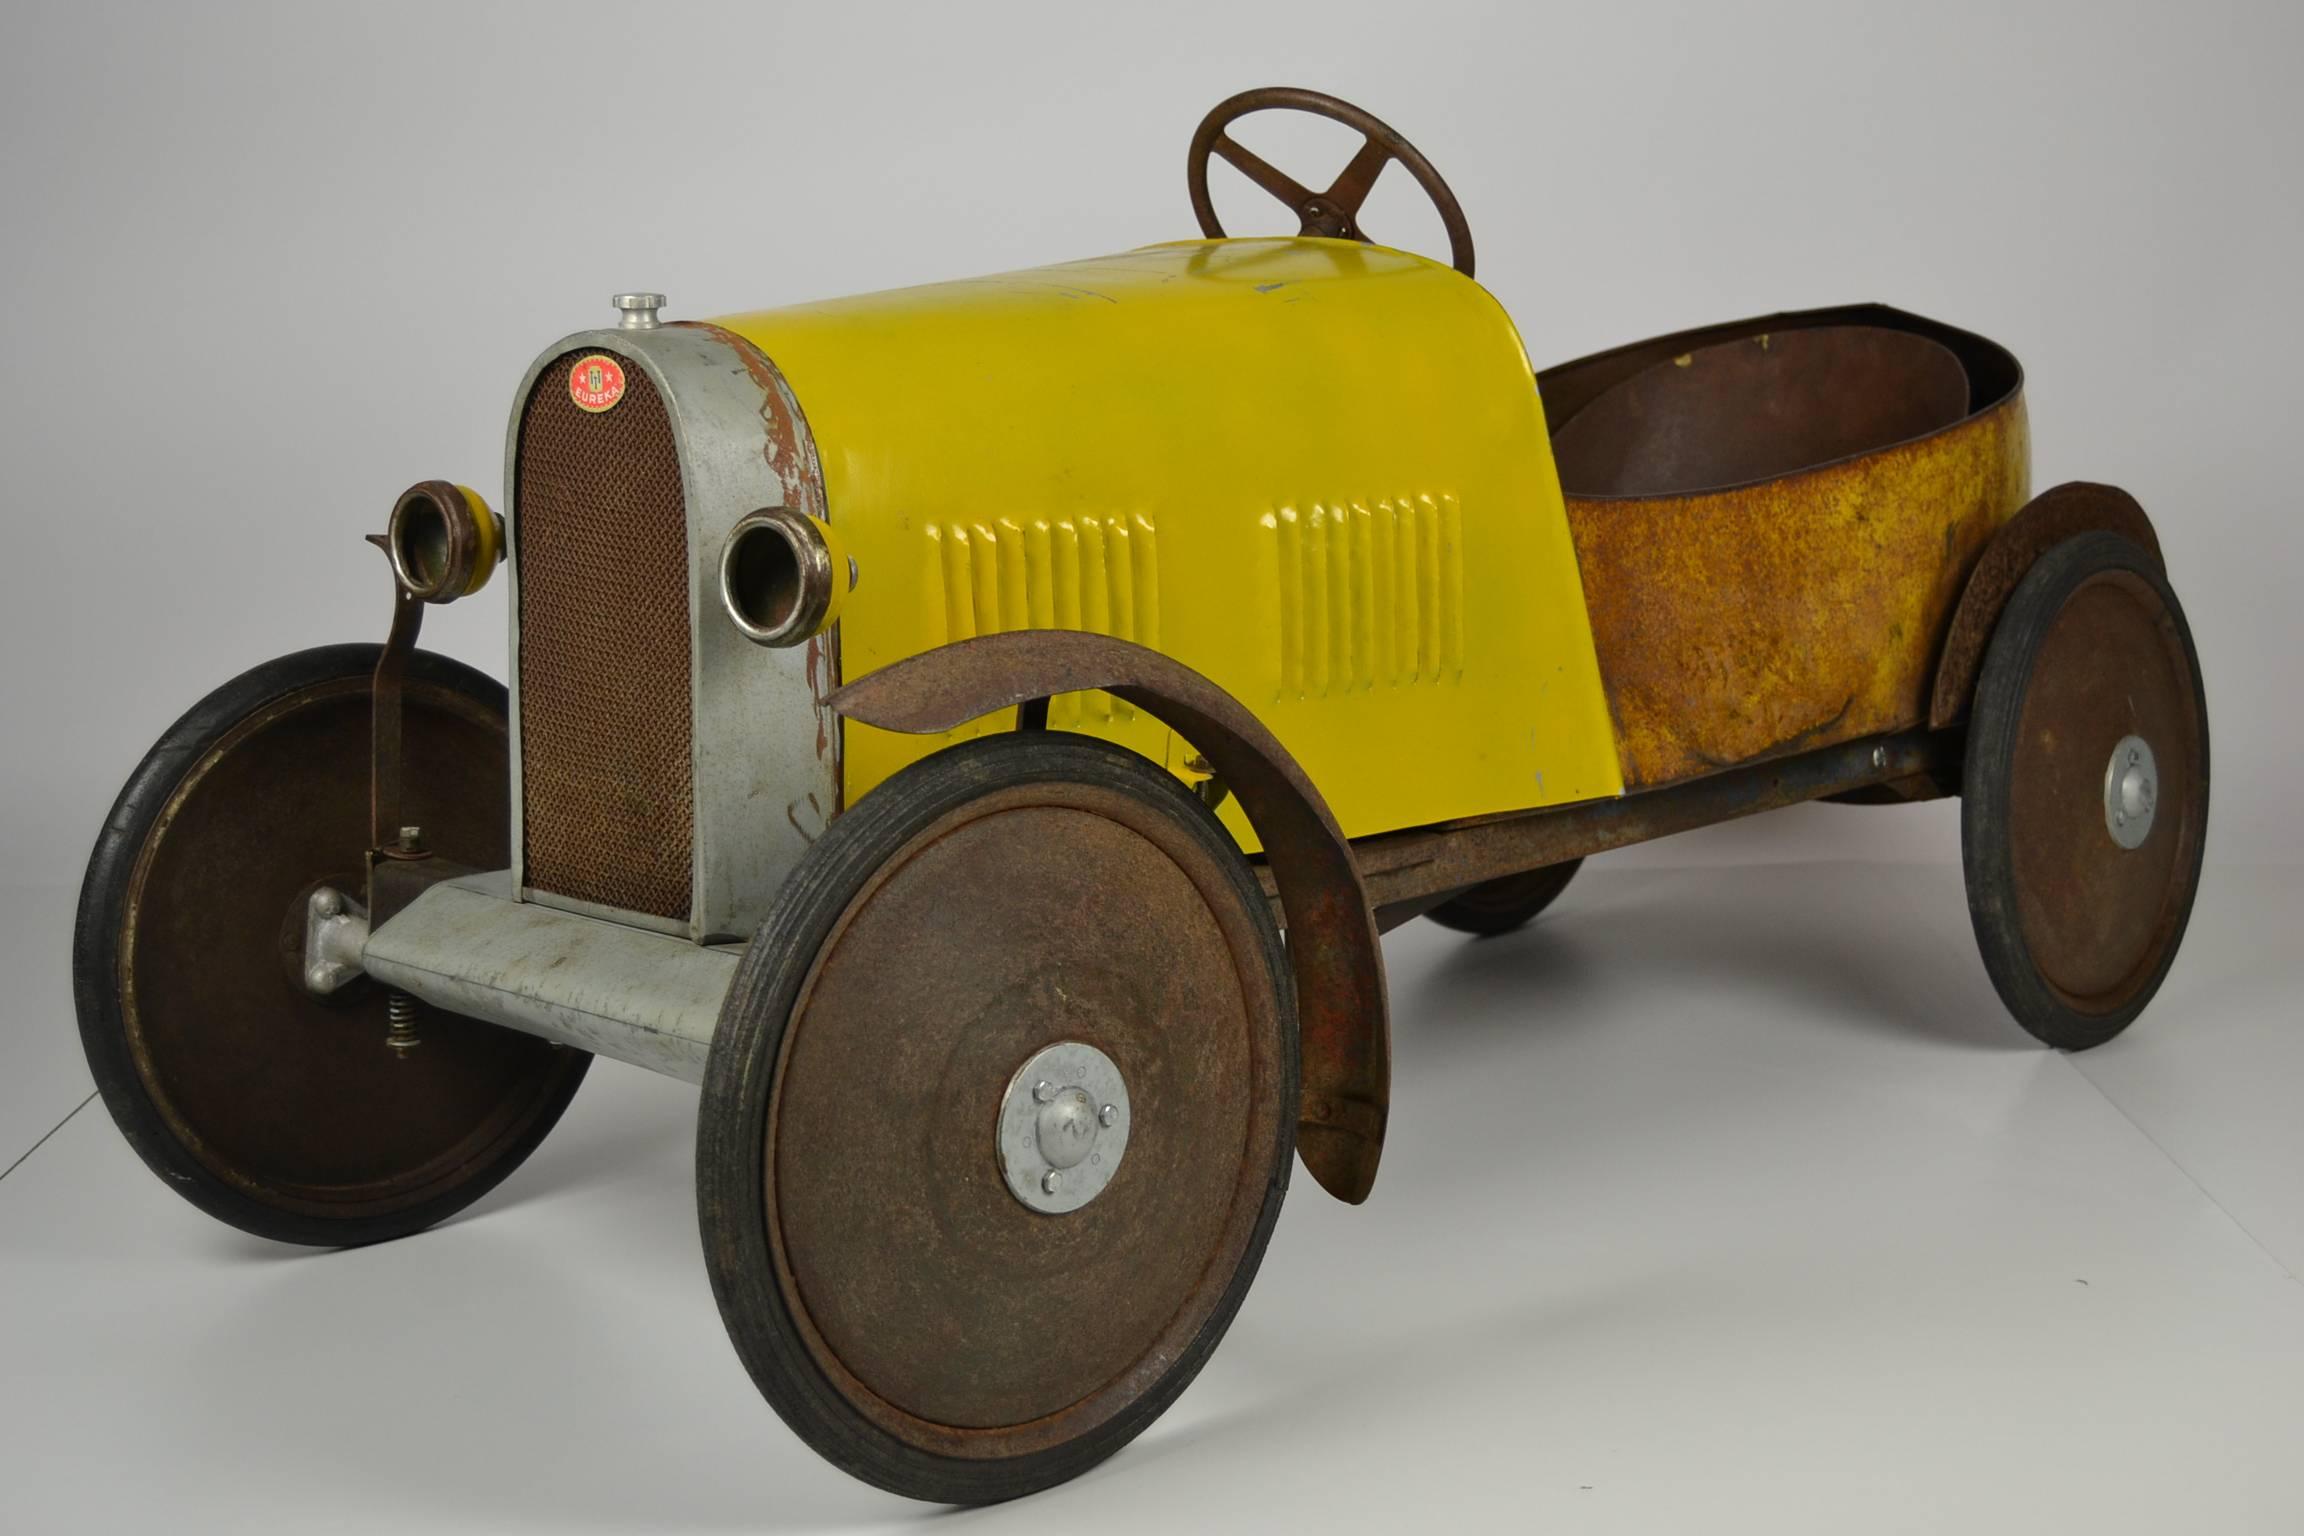 Awesome big pedal car made by Euréka France and produced from 1927-1933. Model Bugatti Sport N°1/27 which is a big sized model. This was a very expensive toy car for that time and could only be bought by the Elite.

It has a metal body and